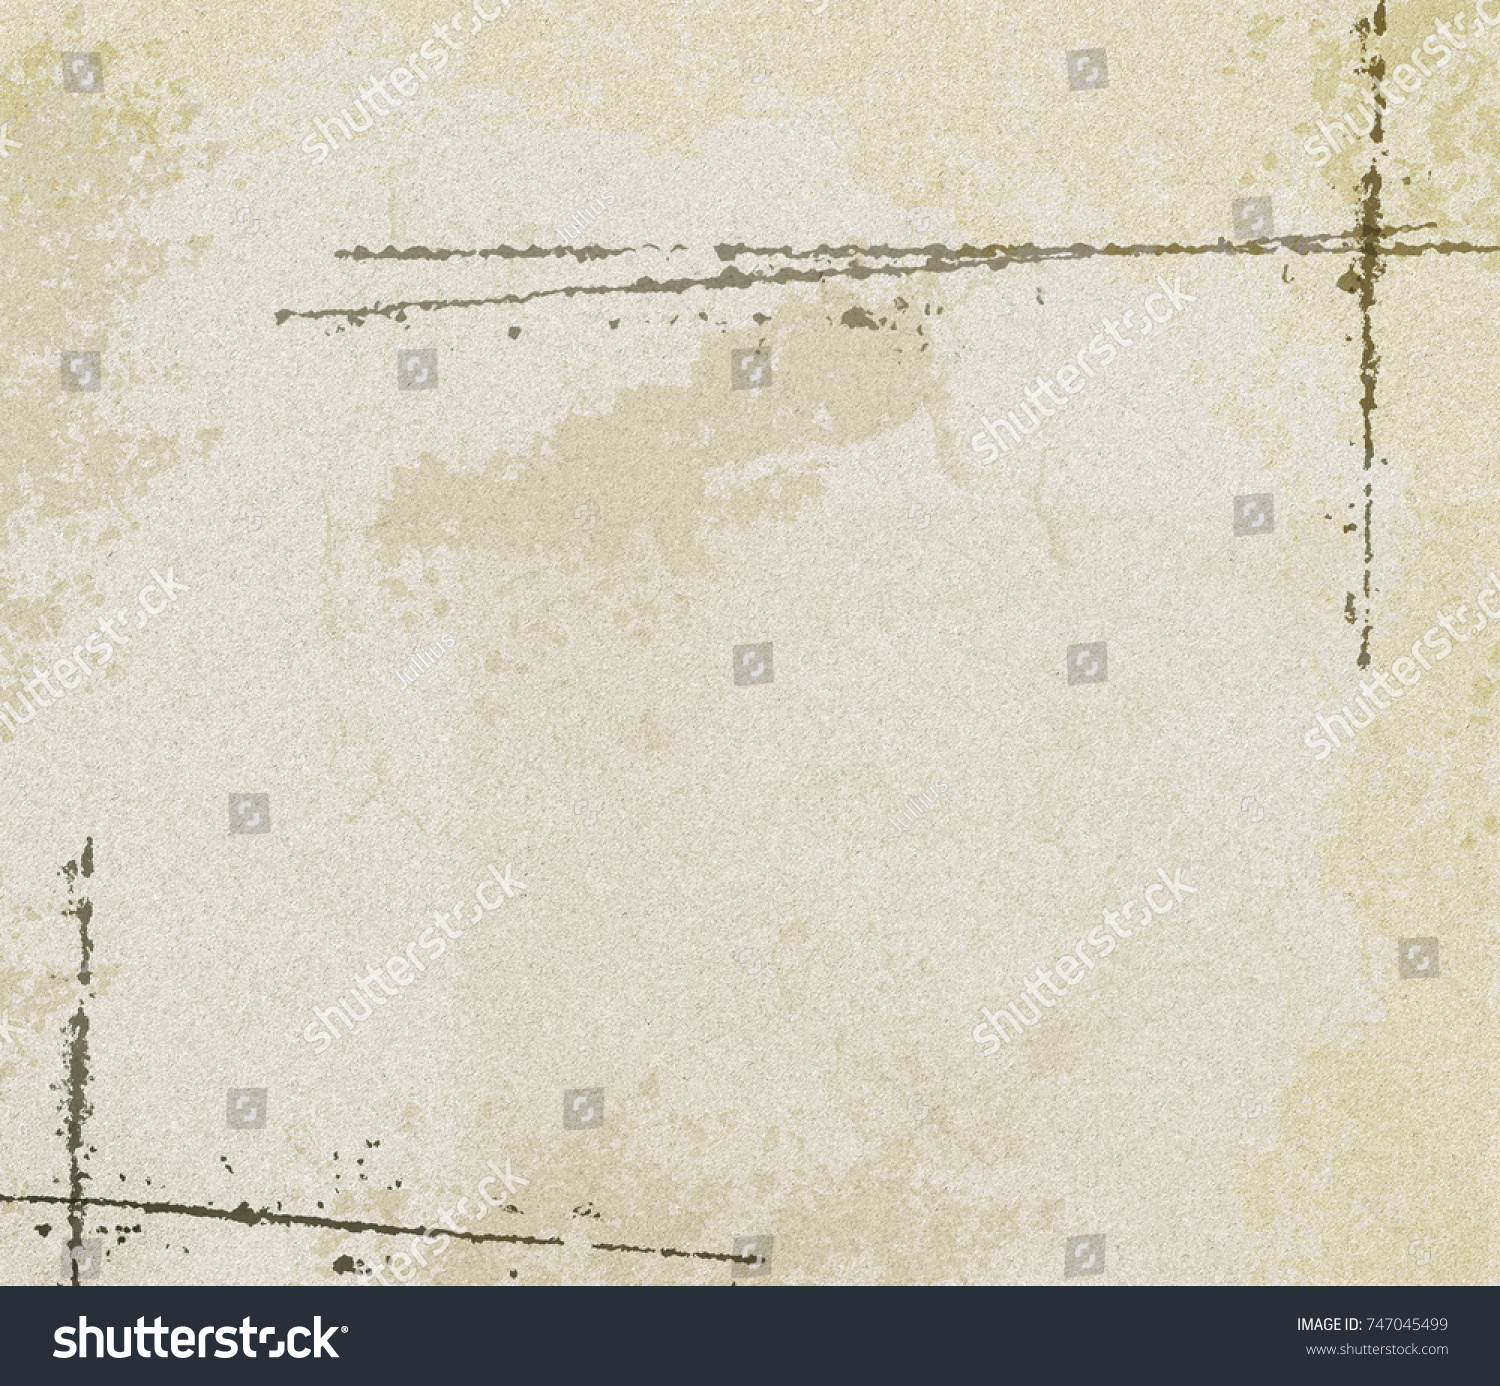 Old Grungy Paper Texture Dirty Paper Stock Photo 747045499 ...